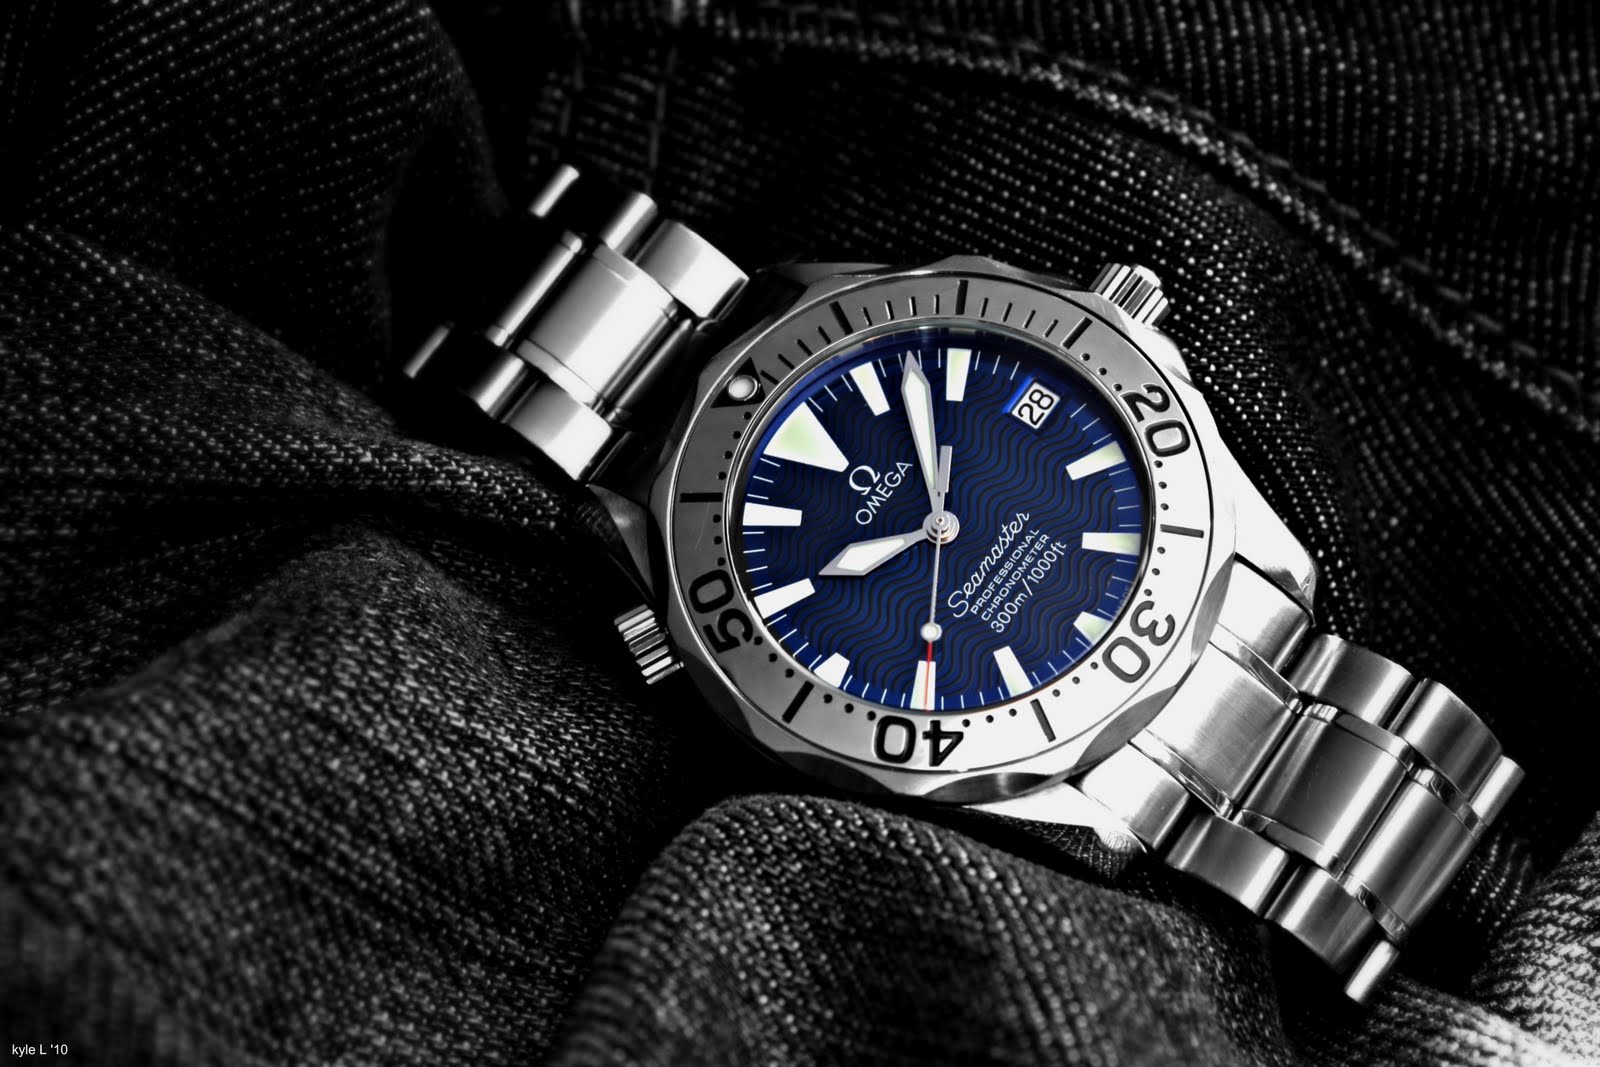 Kyle's Watch Wallpapers: Omega Seamaster Electric Blue